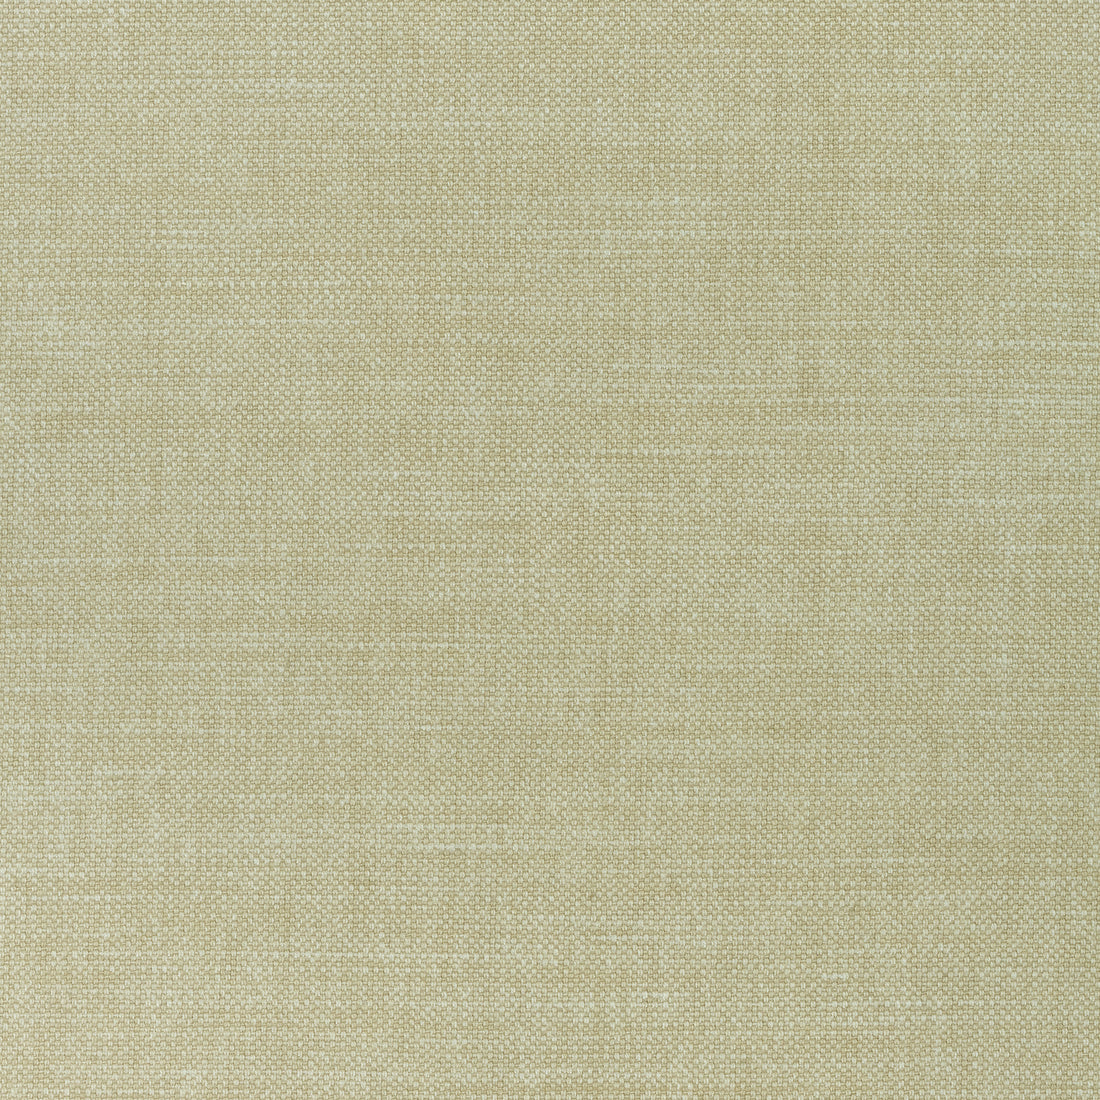 Prisma fabric in sand color - pattern number W70107 - by Thibaut in the Woven Resource Vol 12 Prisma Fabrics collection